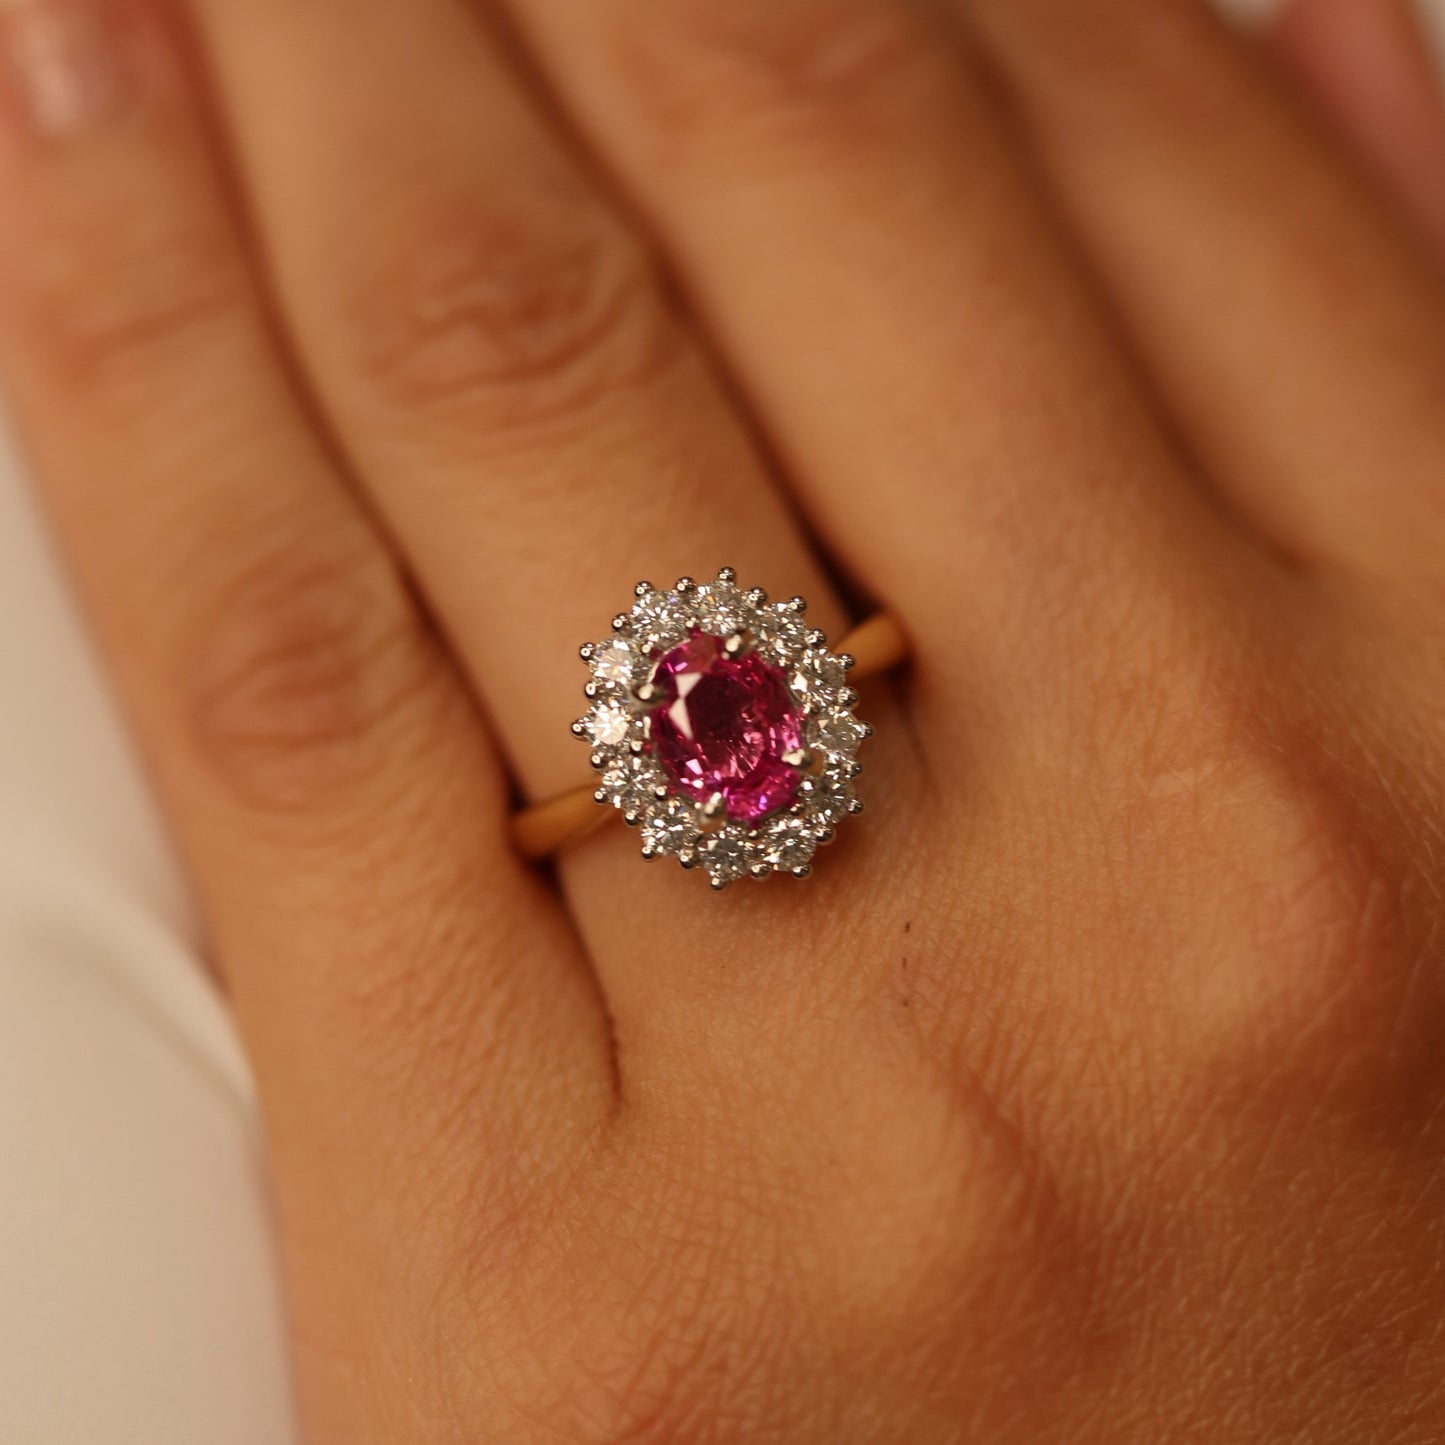 "The Kate" Pink Sapphire